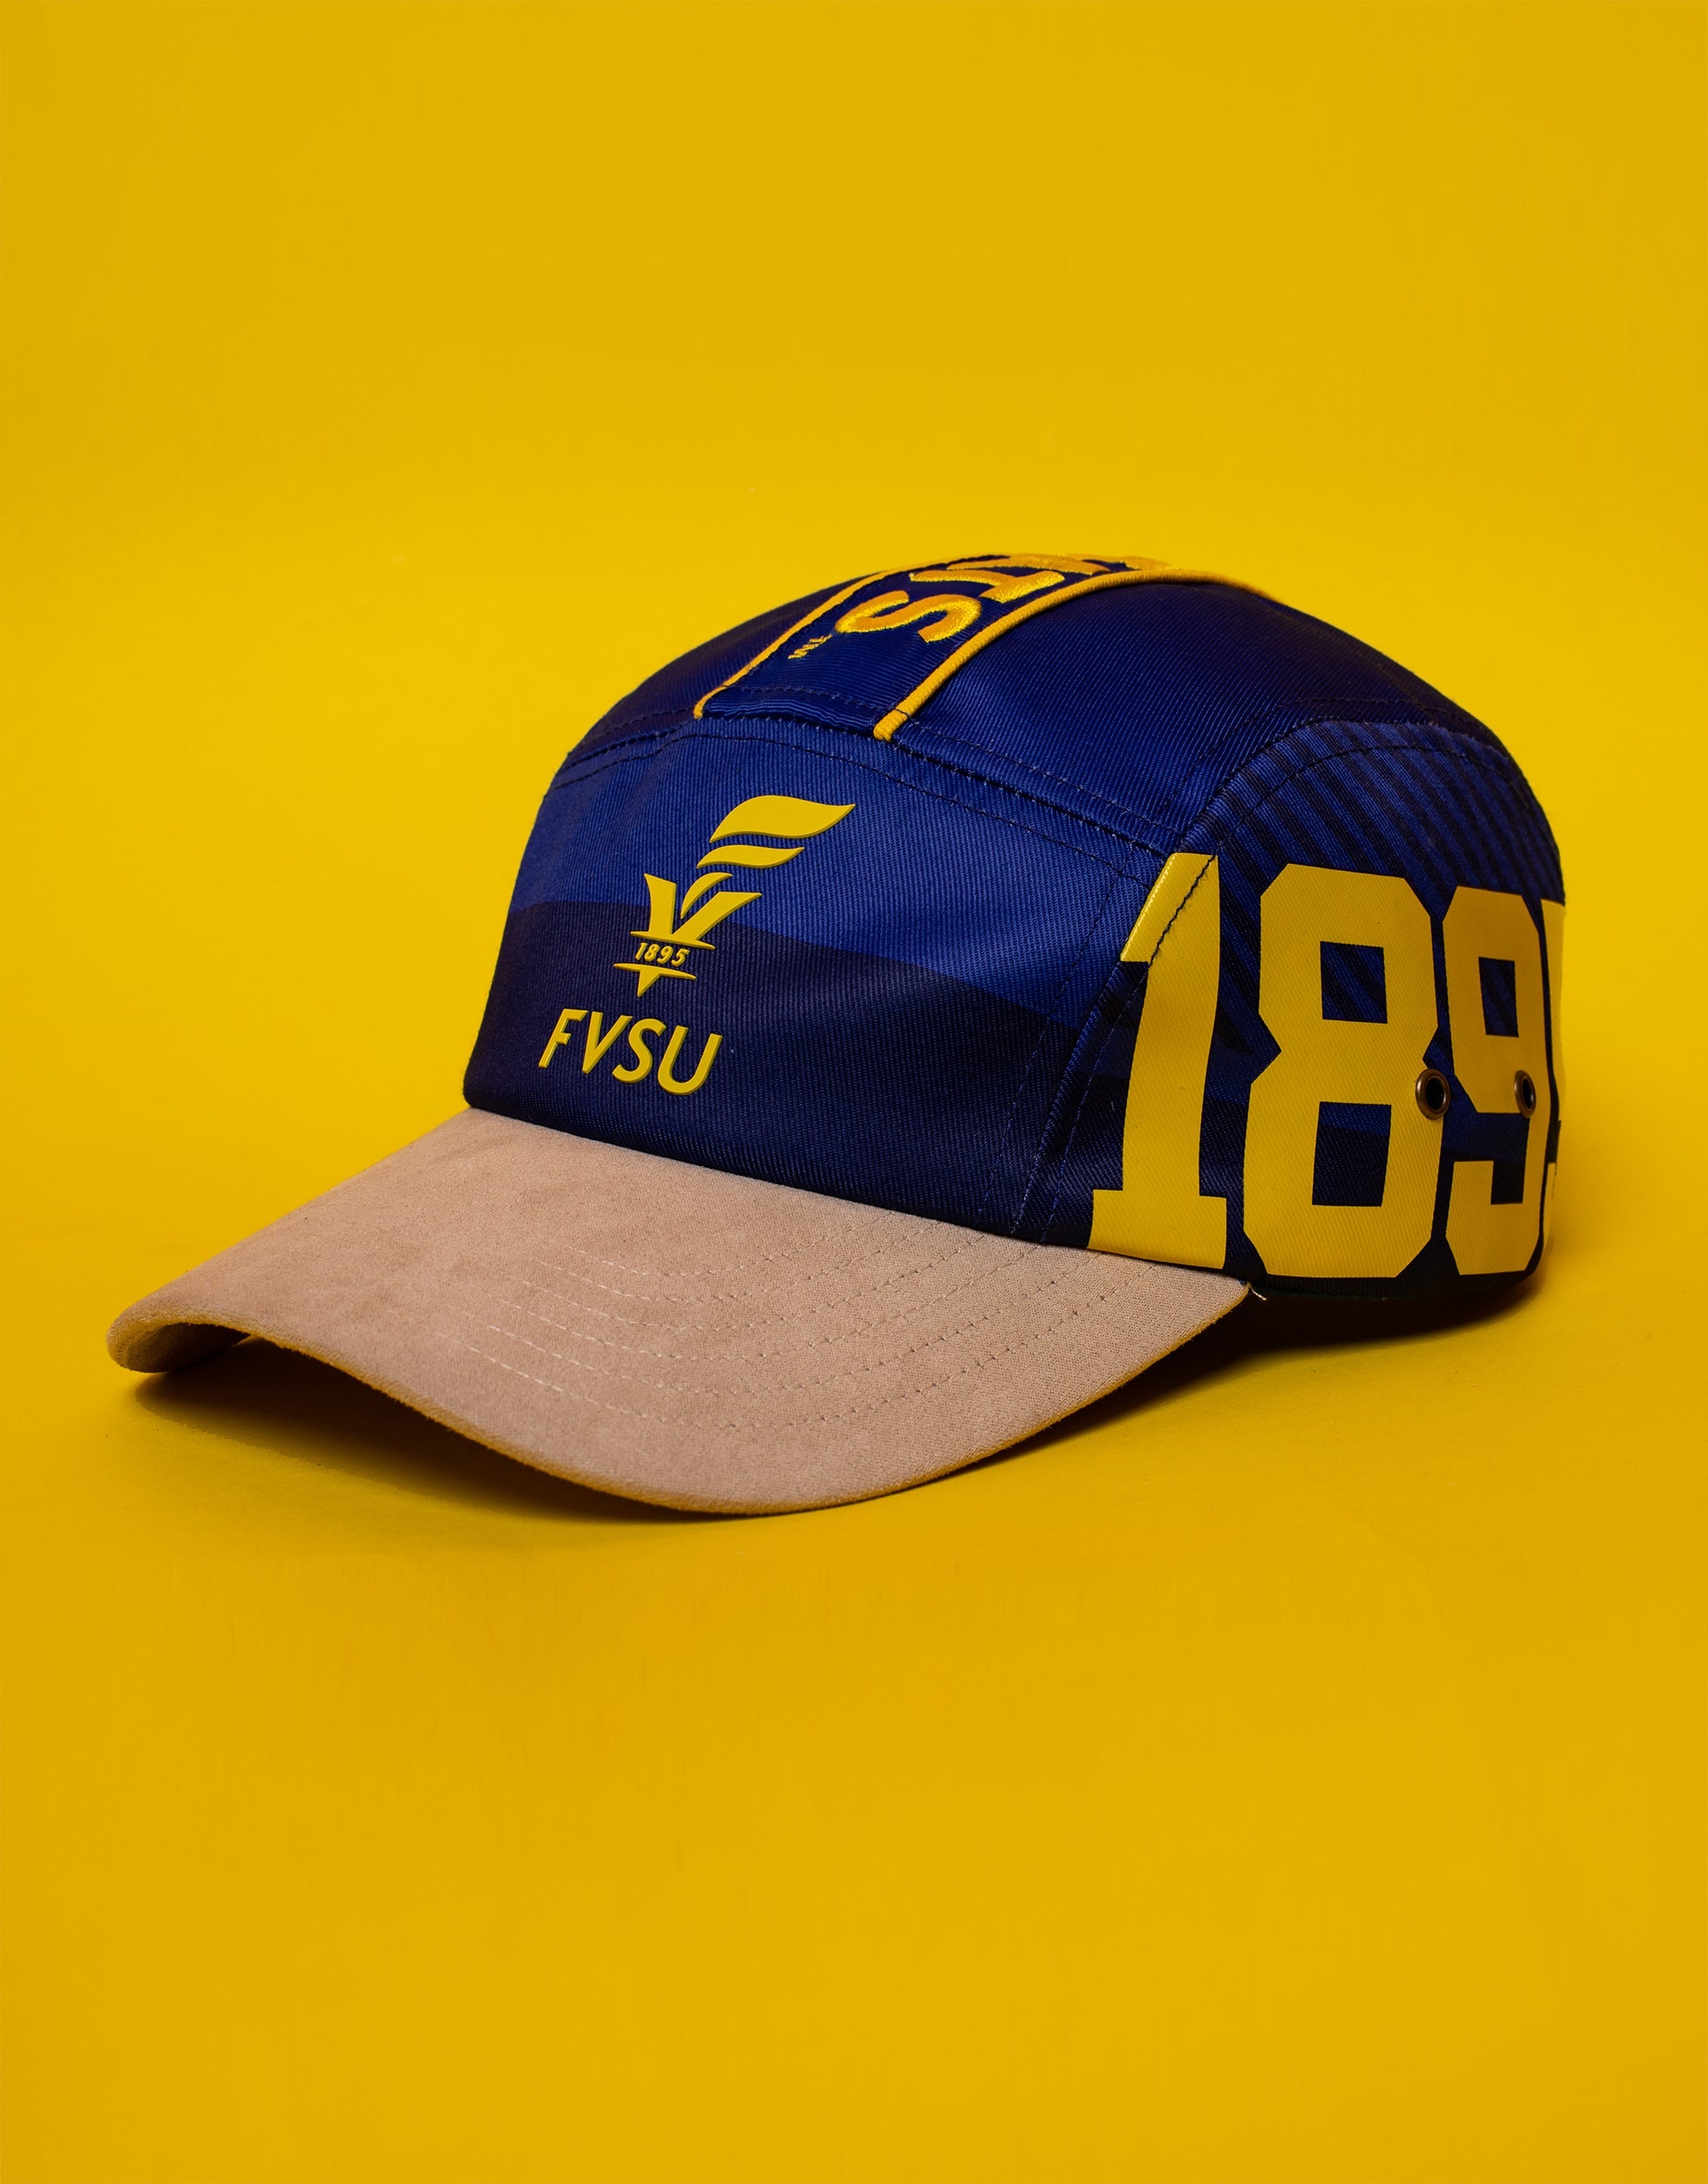 TheYard - Fort Valley State University - HBCU Hat